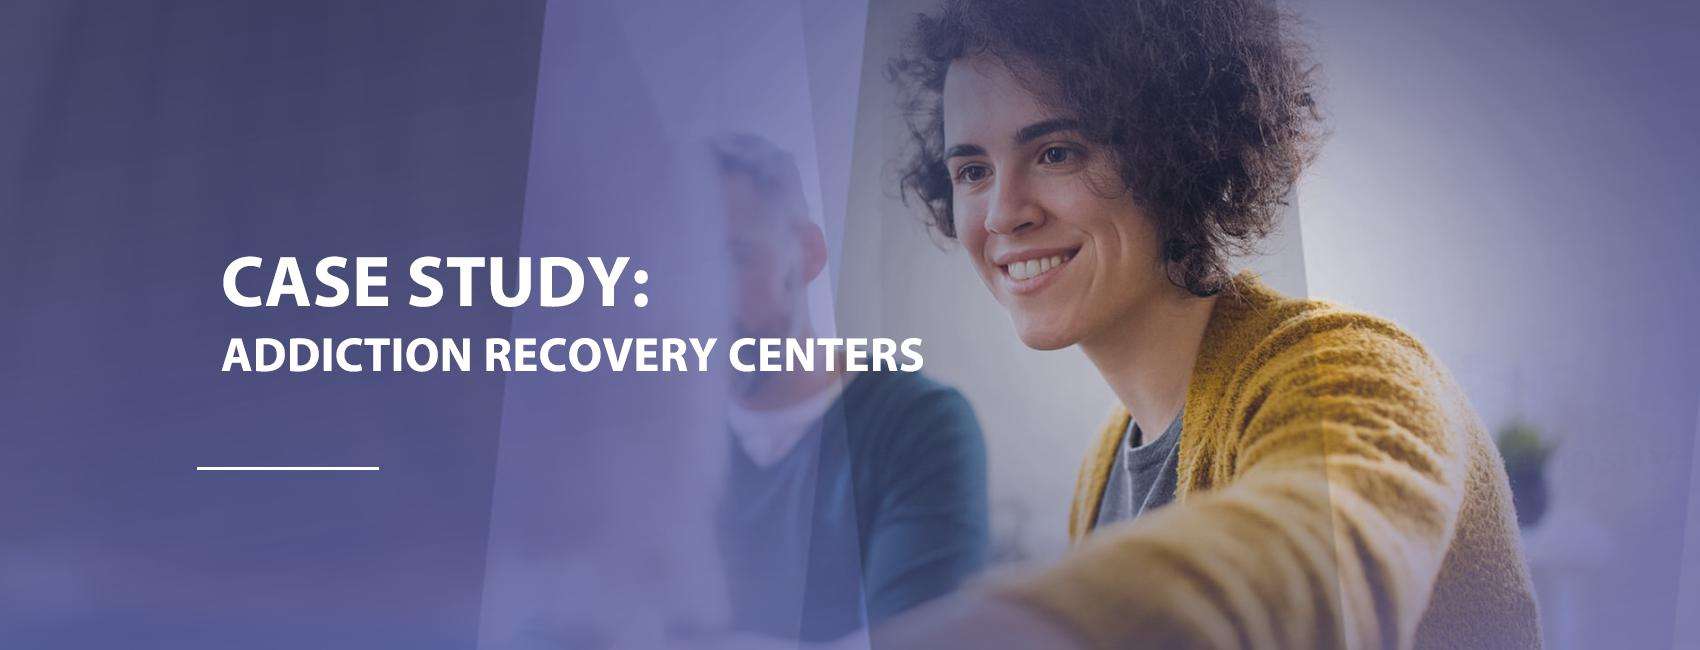 Addiction recovery centers